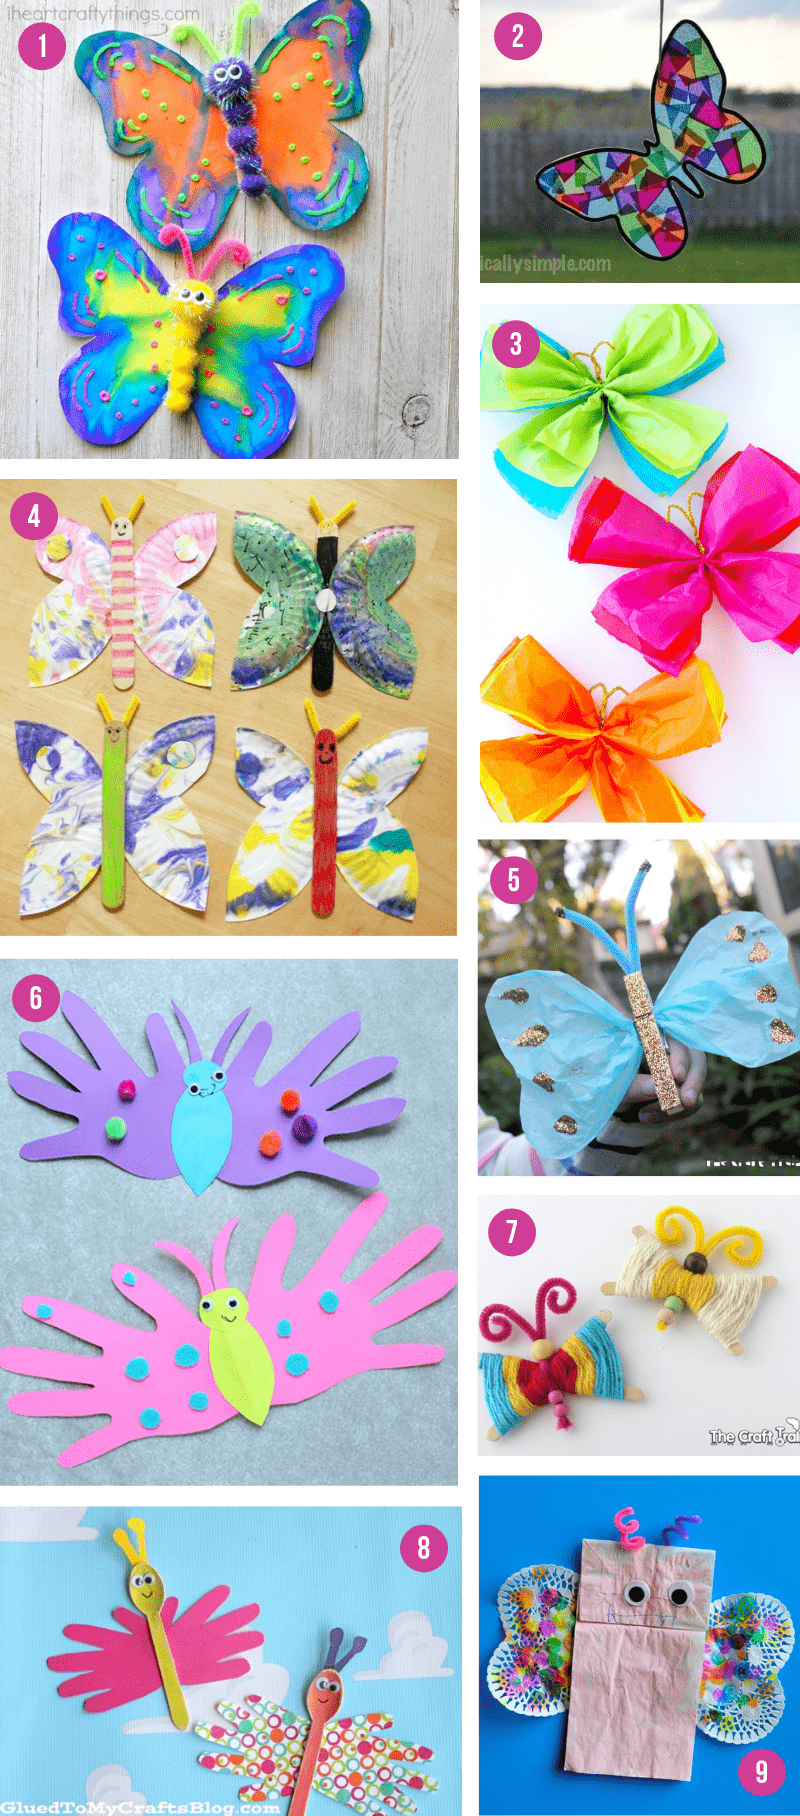 Simple Spring Art Project for Toddlers and Preschooles